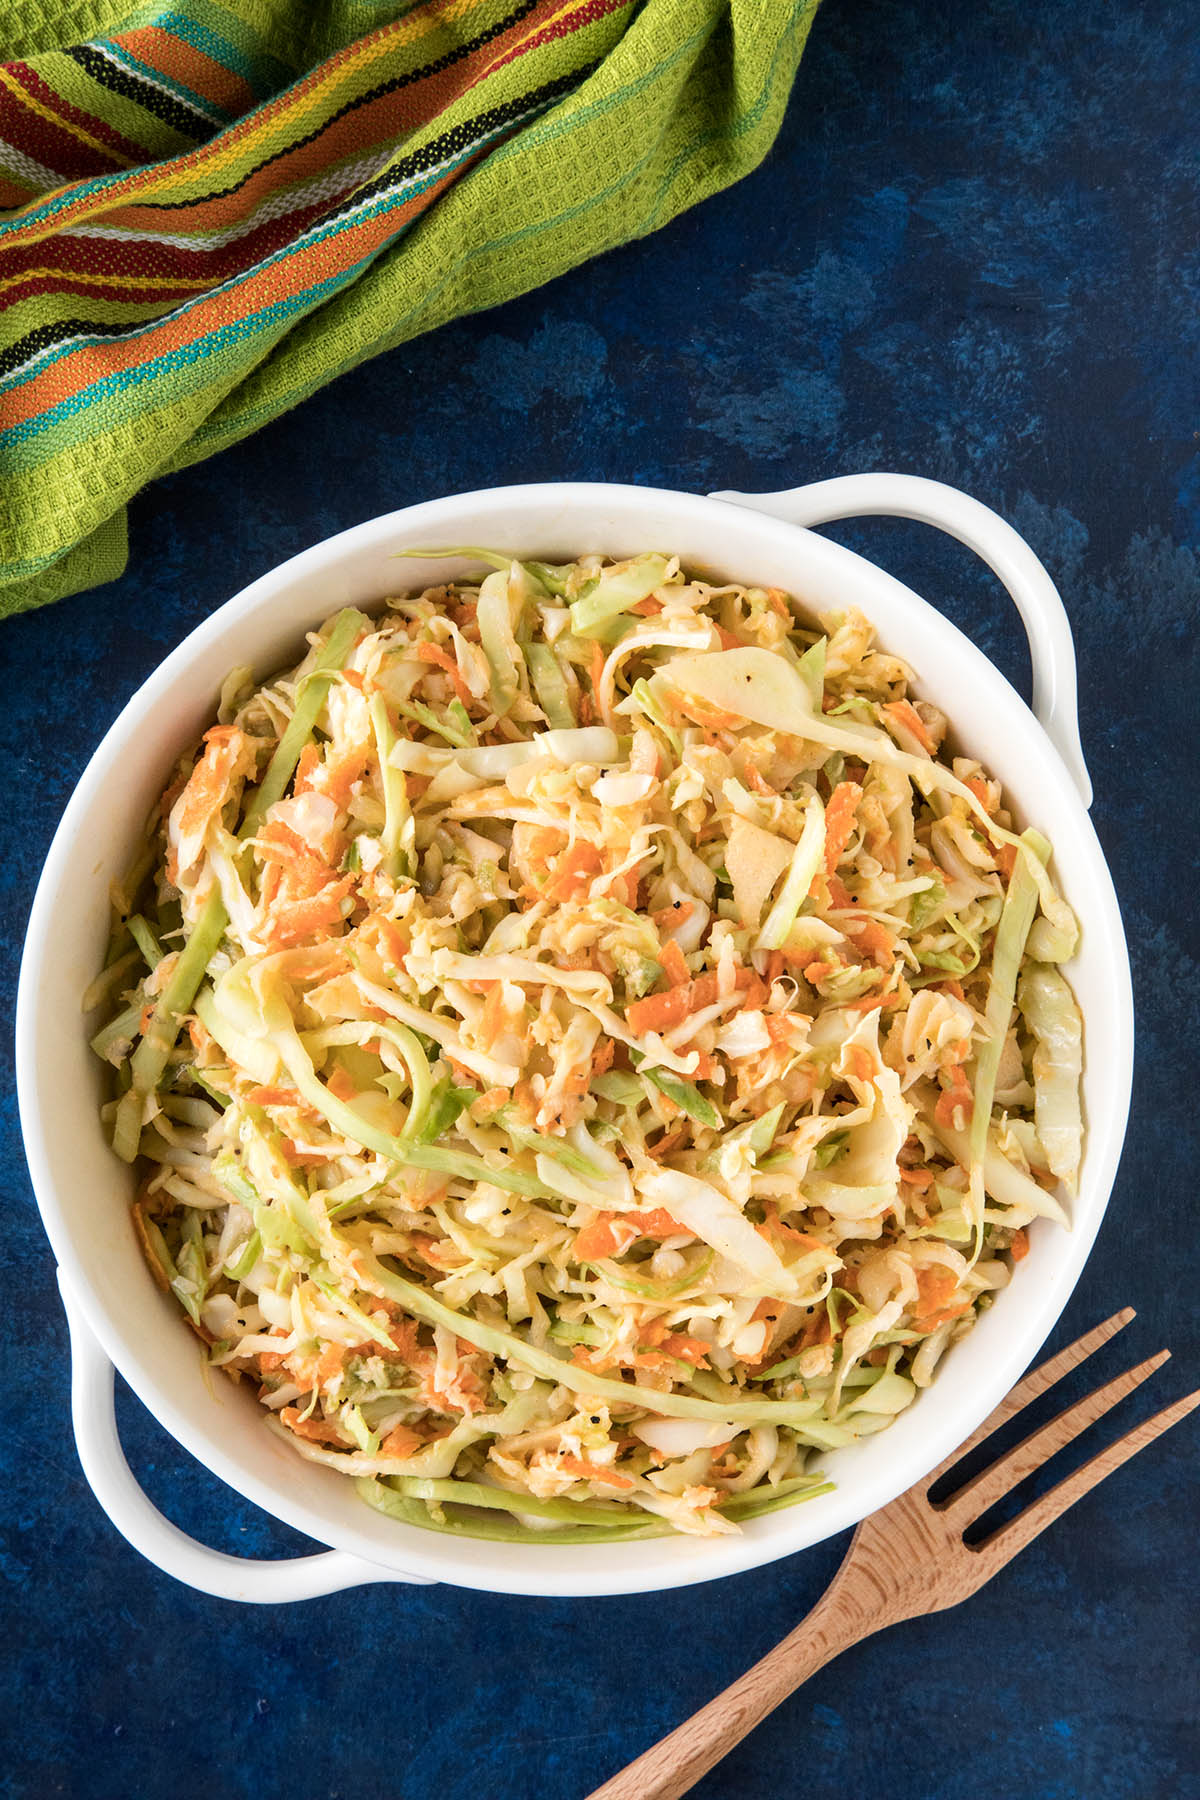 Spicy Creamy Coleslaw - Ready to Eat!